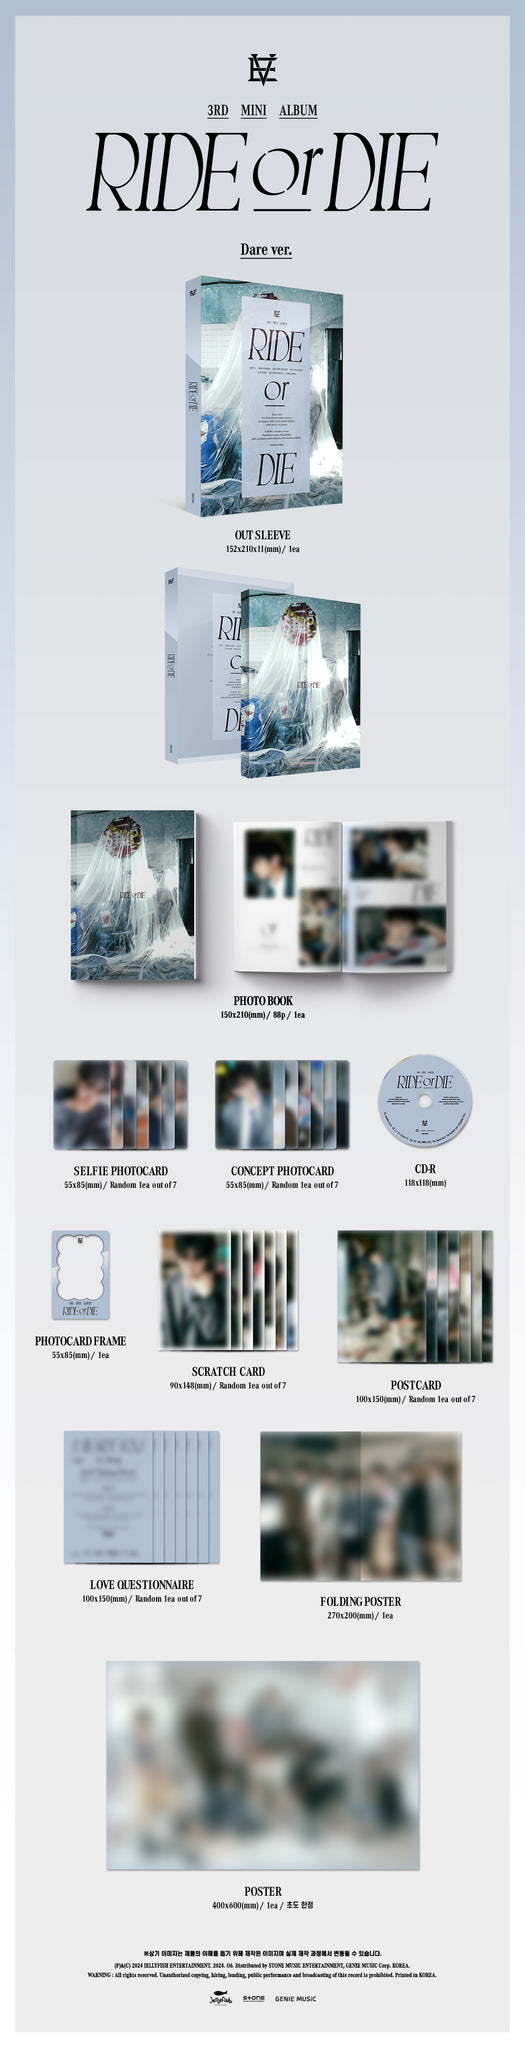 EVNNE 3rd Mini Album RIDE or DIE - Dare Version Inclusions: Out Sleeve, Photobook, CD, Selfie Photocard, Concept Photocard, Photo Frame, Scratch Card, Love Questionnaire, Postcard, Folding Poster, 1st Press Only Poster